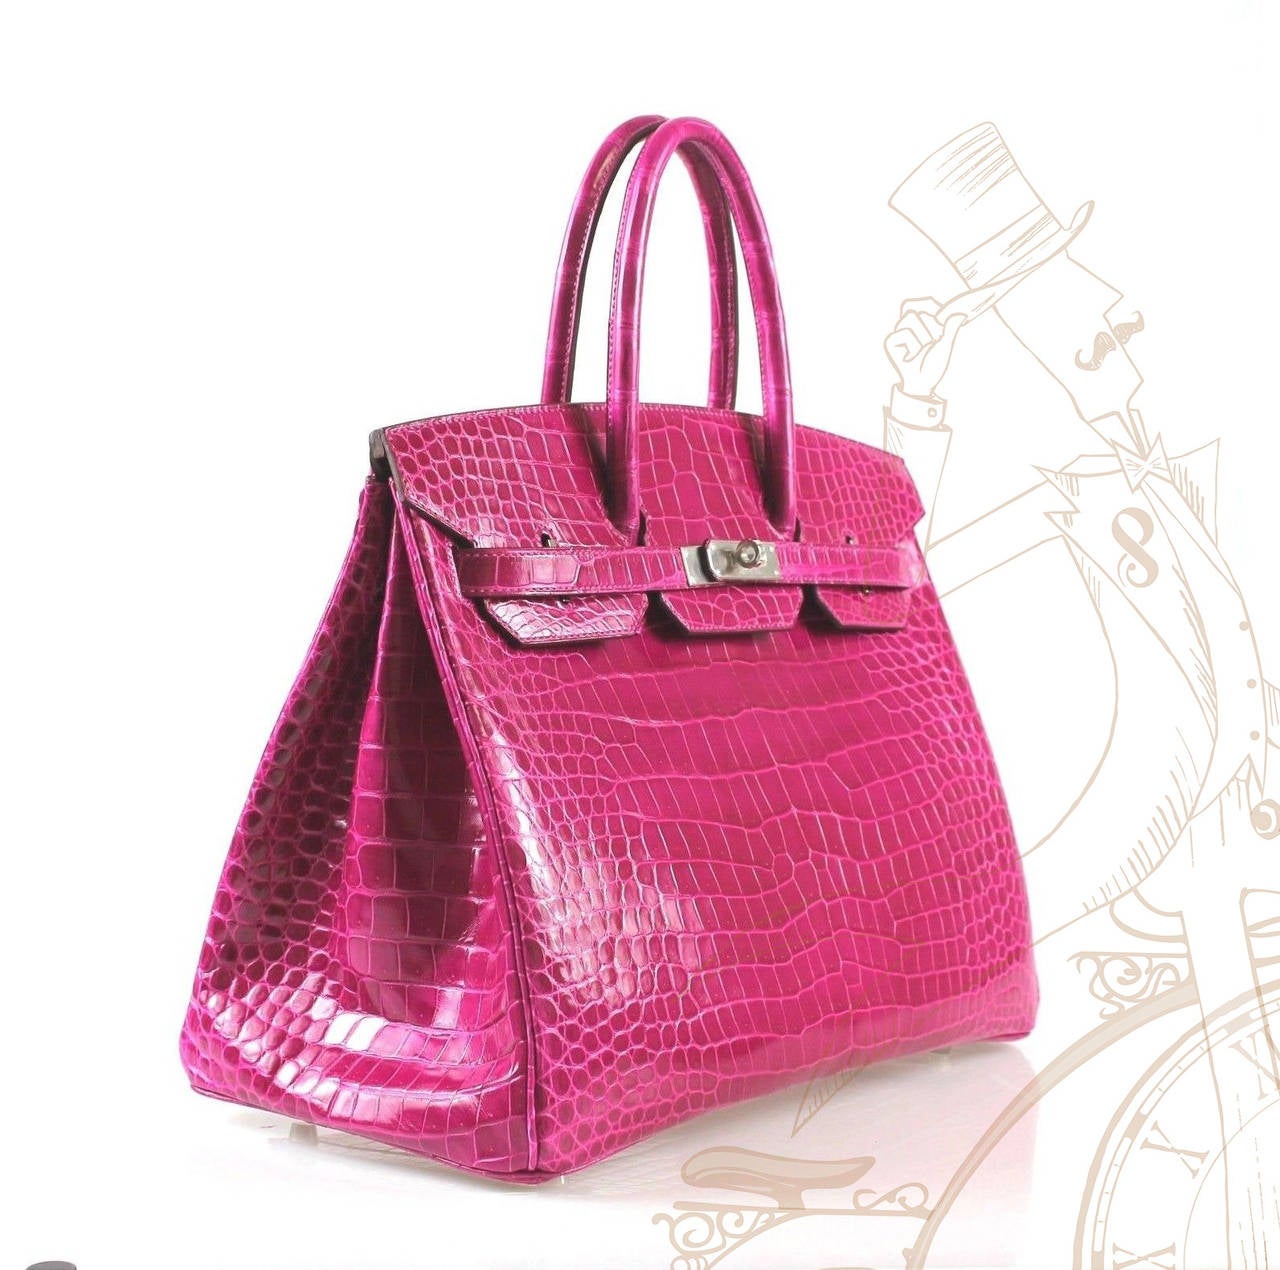 This is an authentic Hermes Shiny Porosus Crocodile Magenta Birkin 35 in Rose Scheherazade. This Birkin Porosus crocodile in bright pink/magenta with contrasting crocodile trim found at the piping, side gussets, top handles and straps. The bag